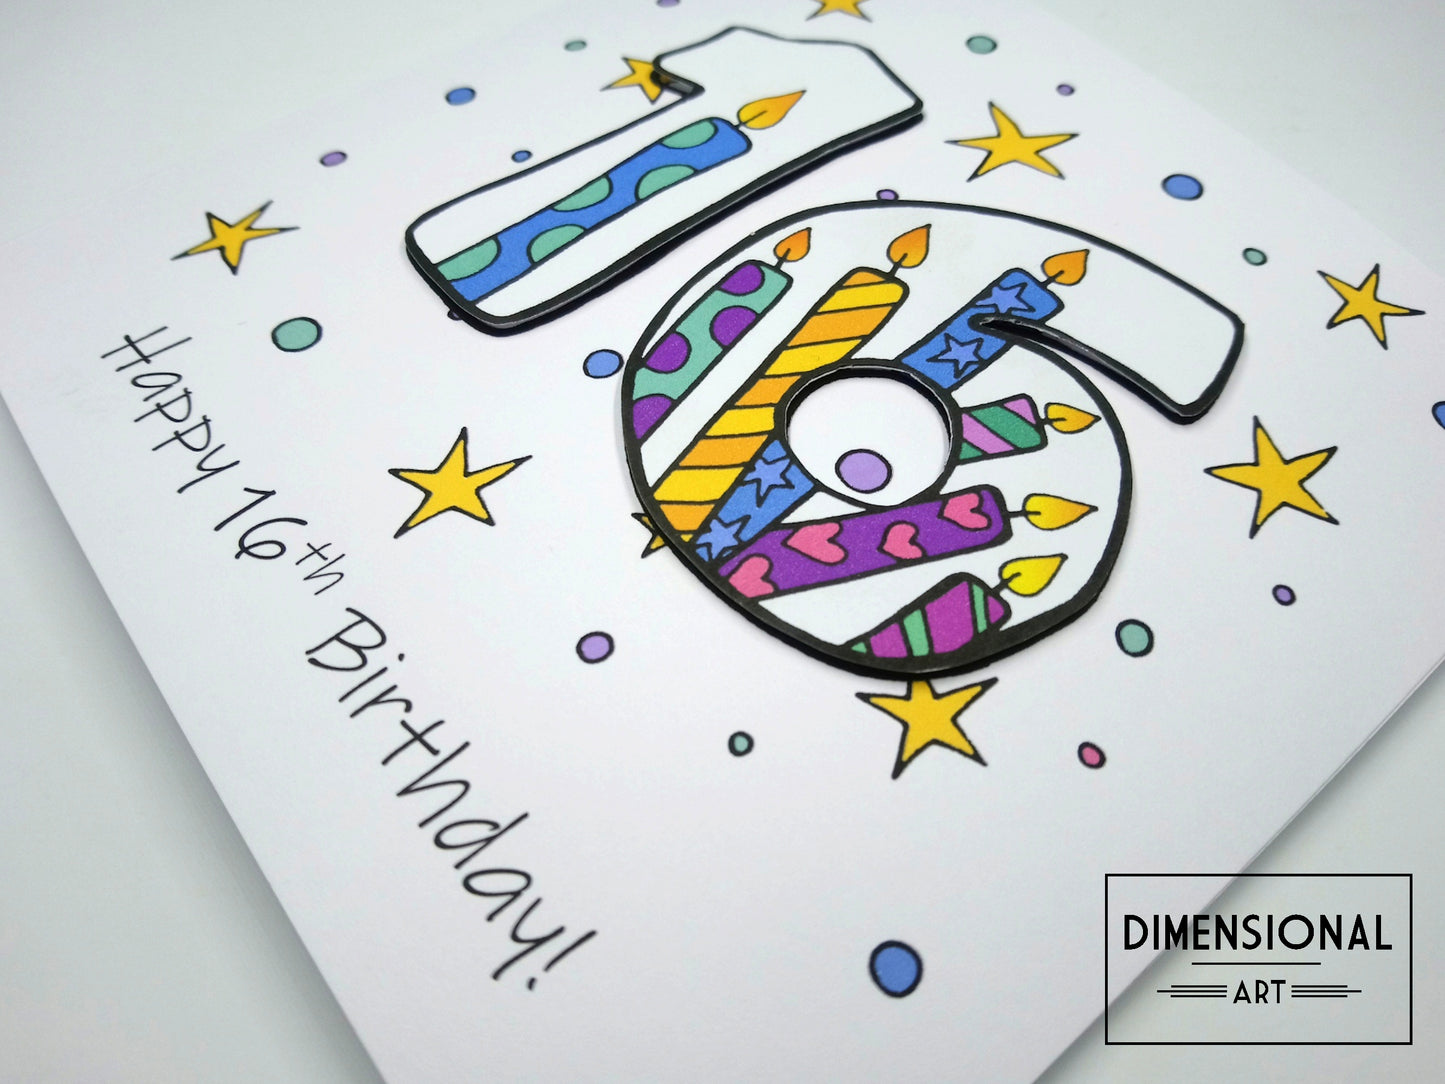 16th Number Candles Birthday Card